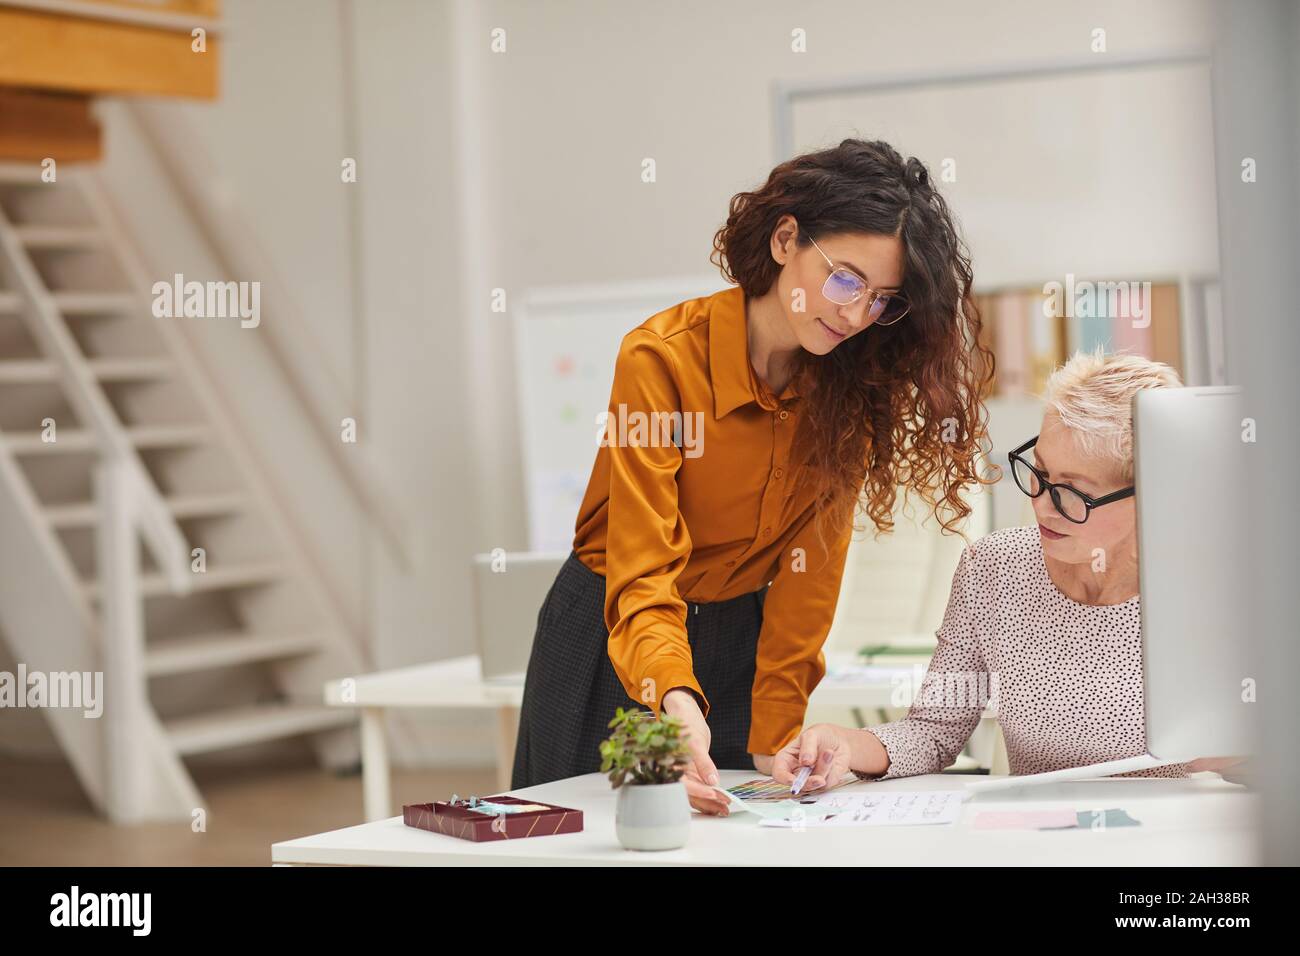 Horizontal shot of two female clothes designers working together on new fashion collection Stock Photo